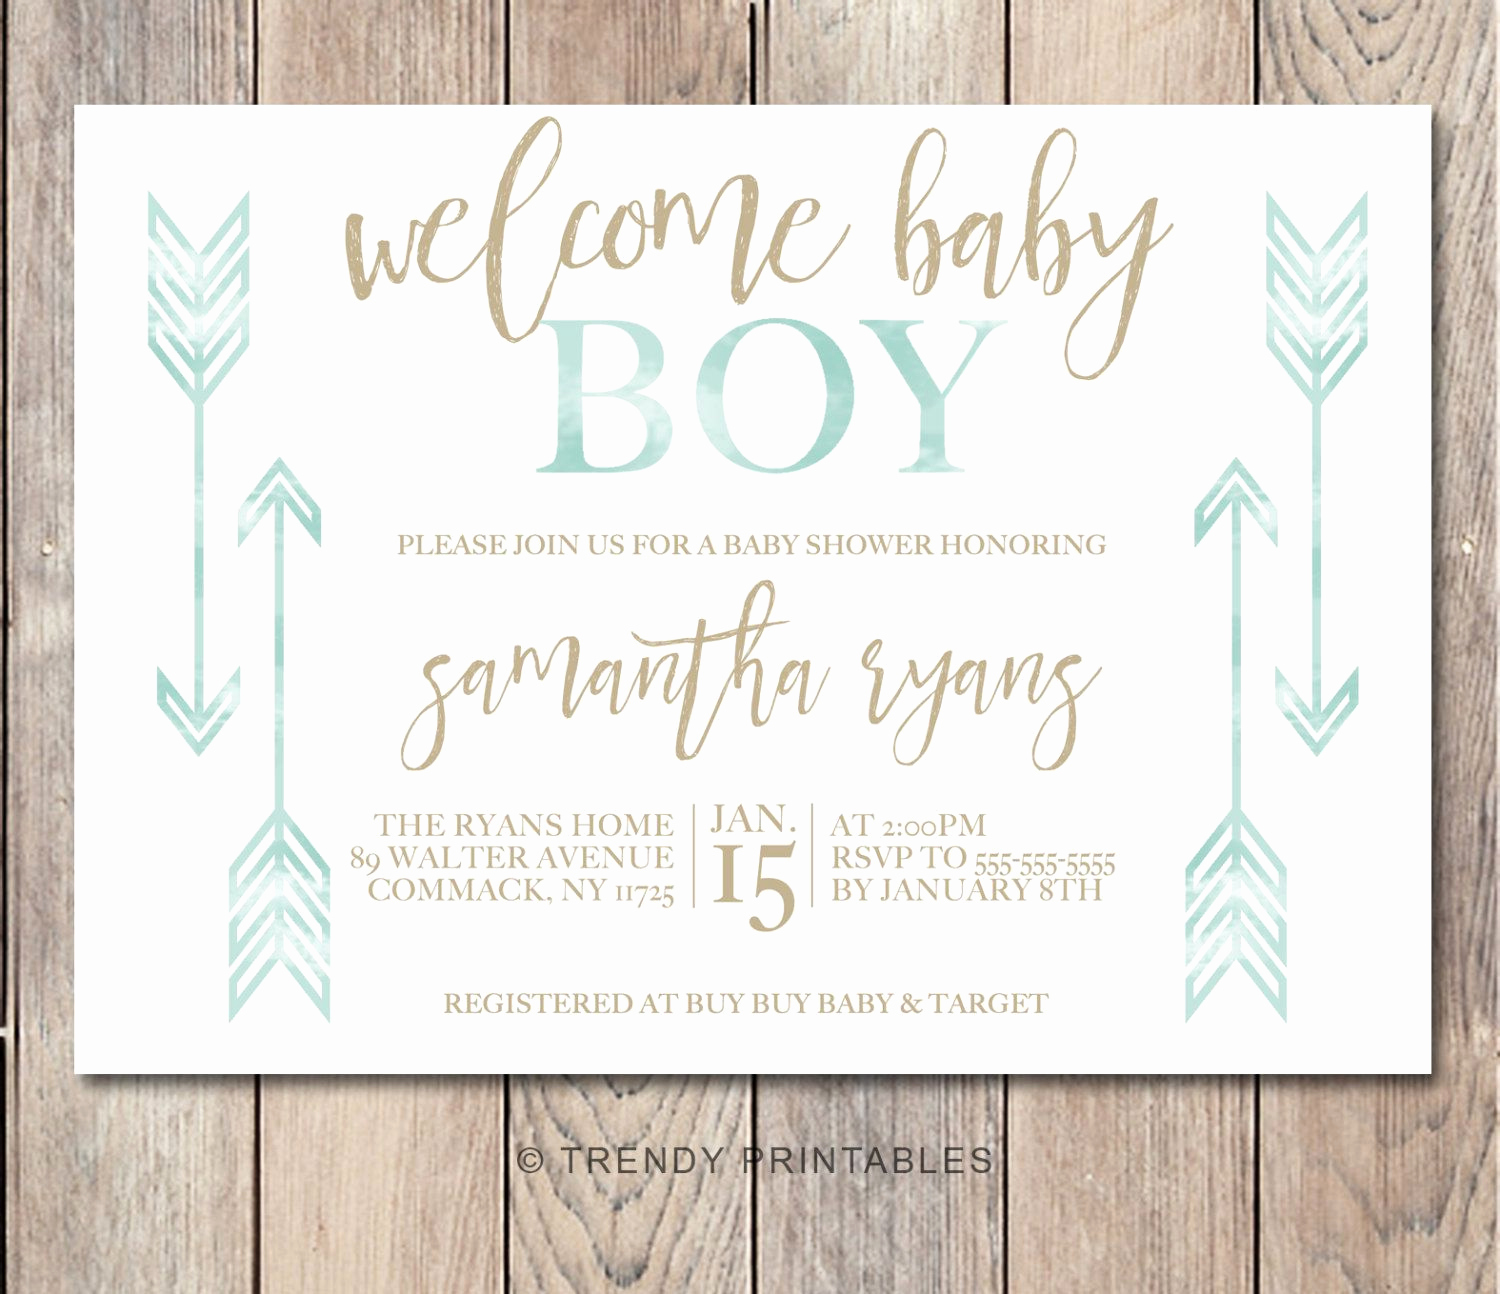 Cheap Baby Shower Invitation Best Of Blank Invitation Templates Free for Word Free Line